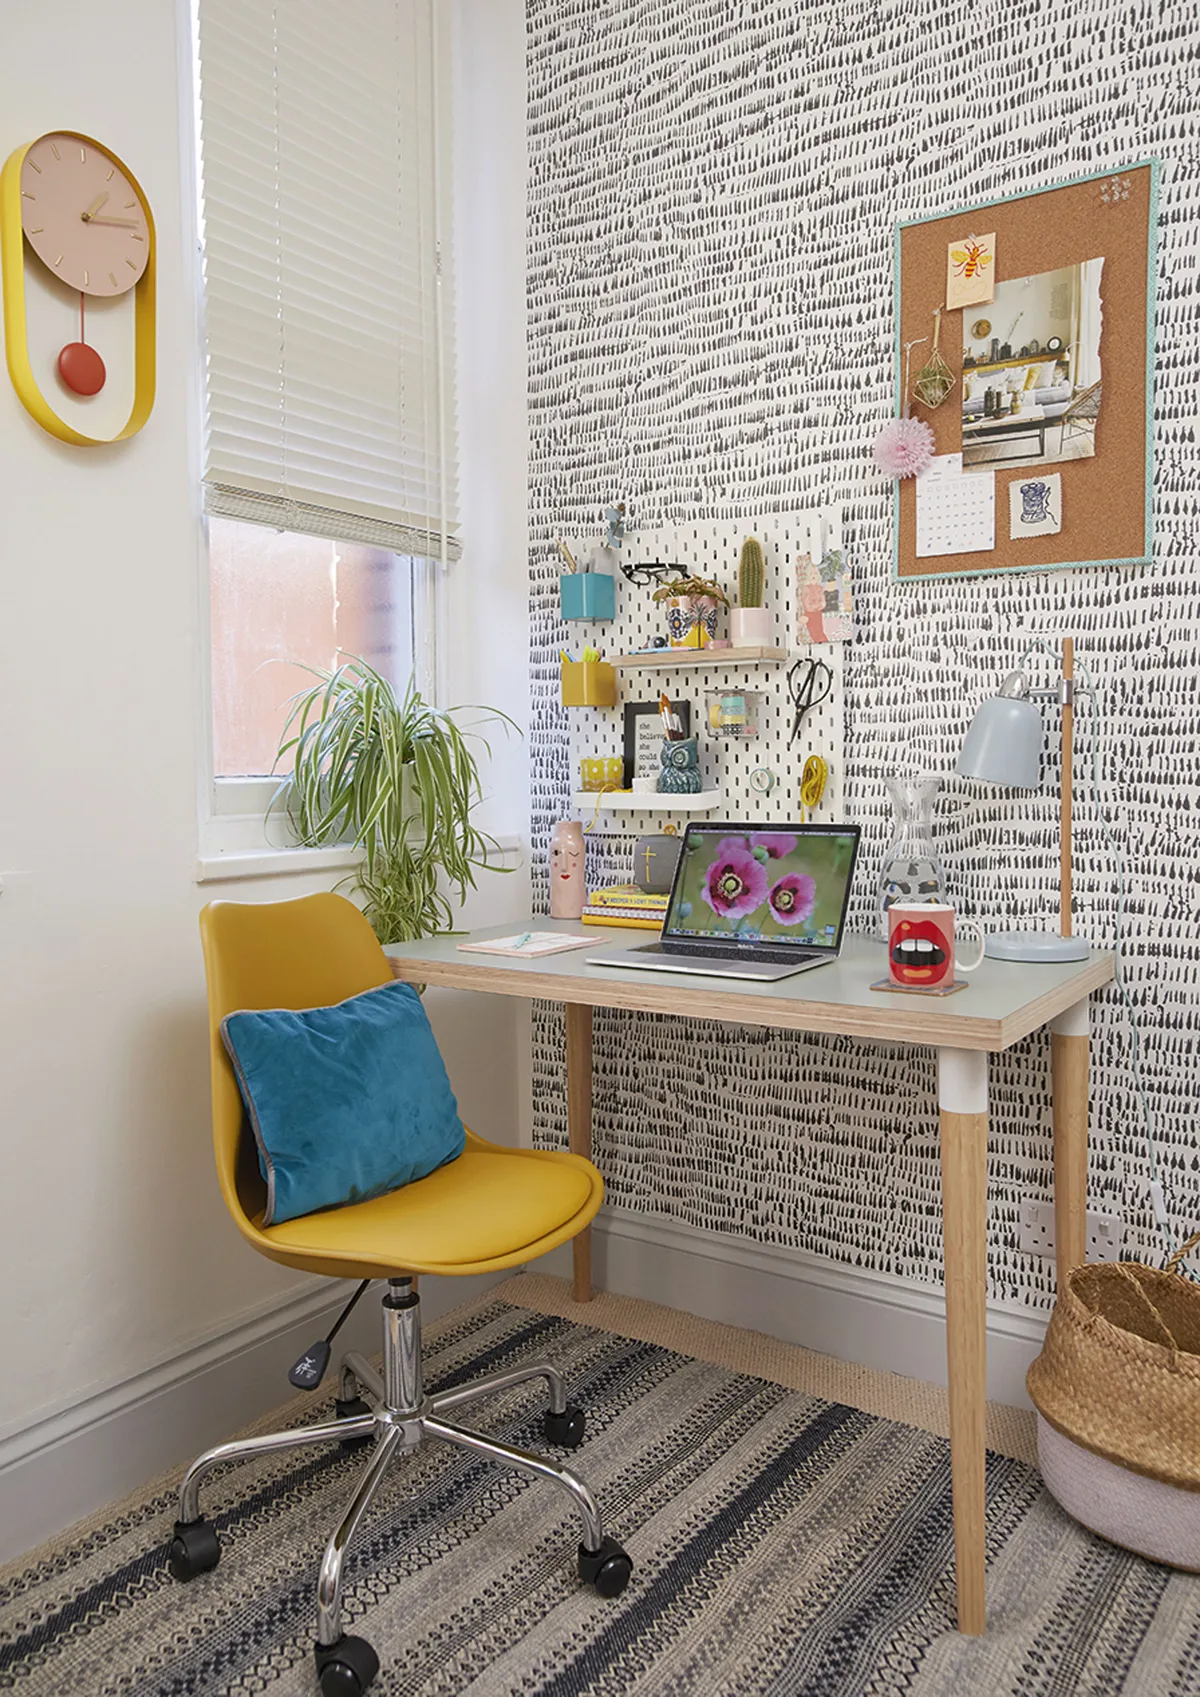 'My small home office has all I need'